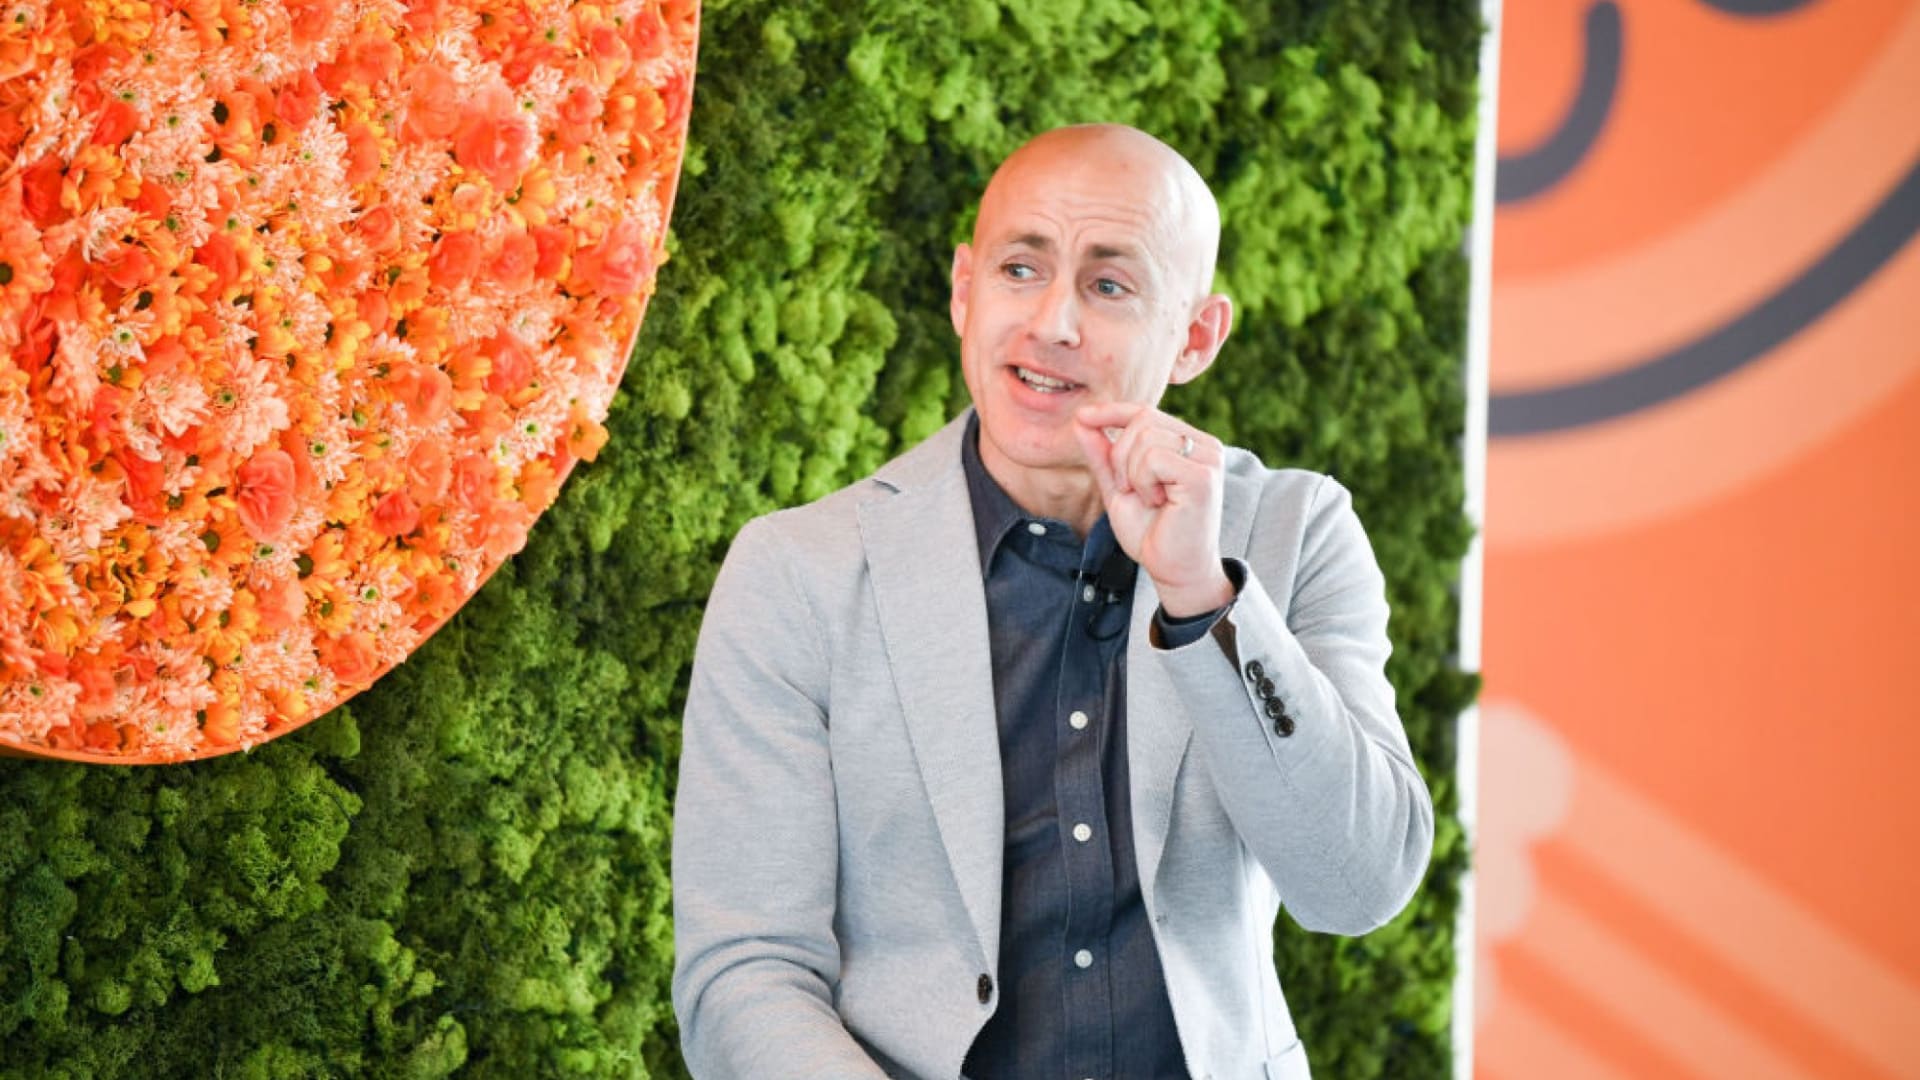 Headspace Co-Founder Andy Puddicombe Has a Simple Plan to Help Your Team Avoid Burnout